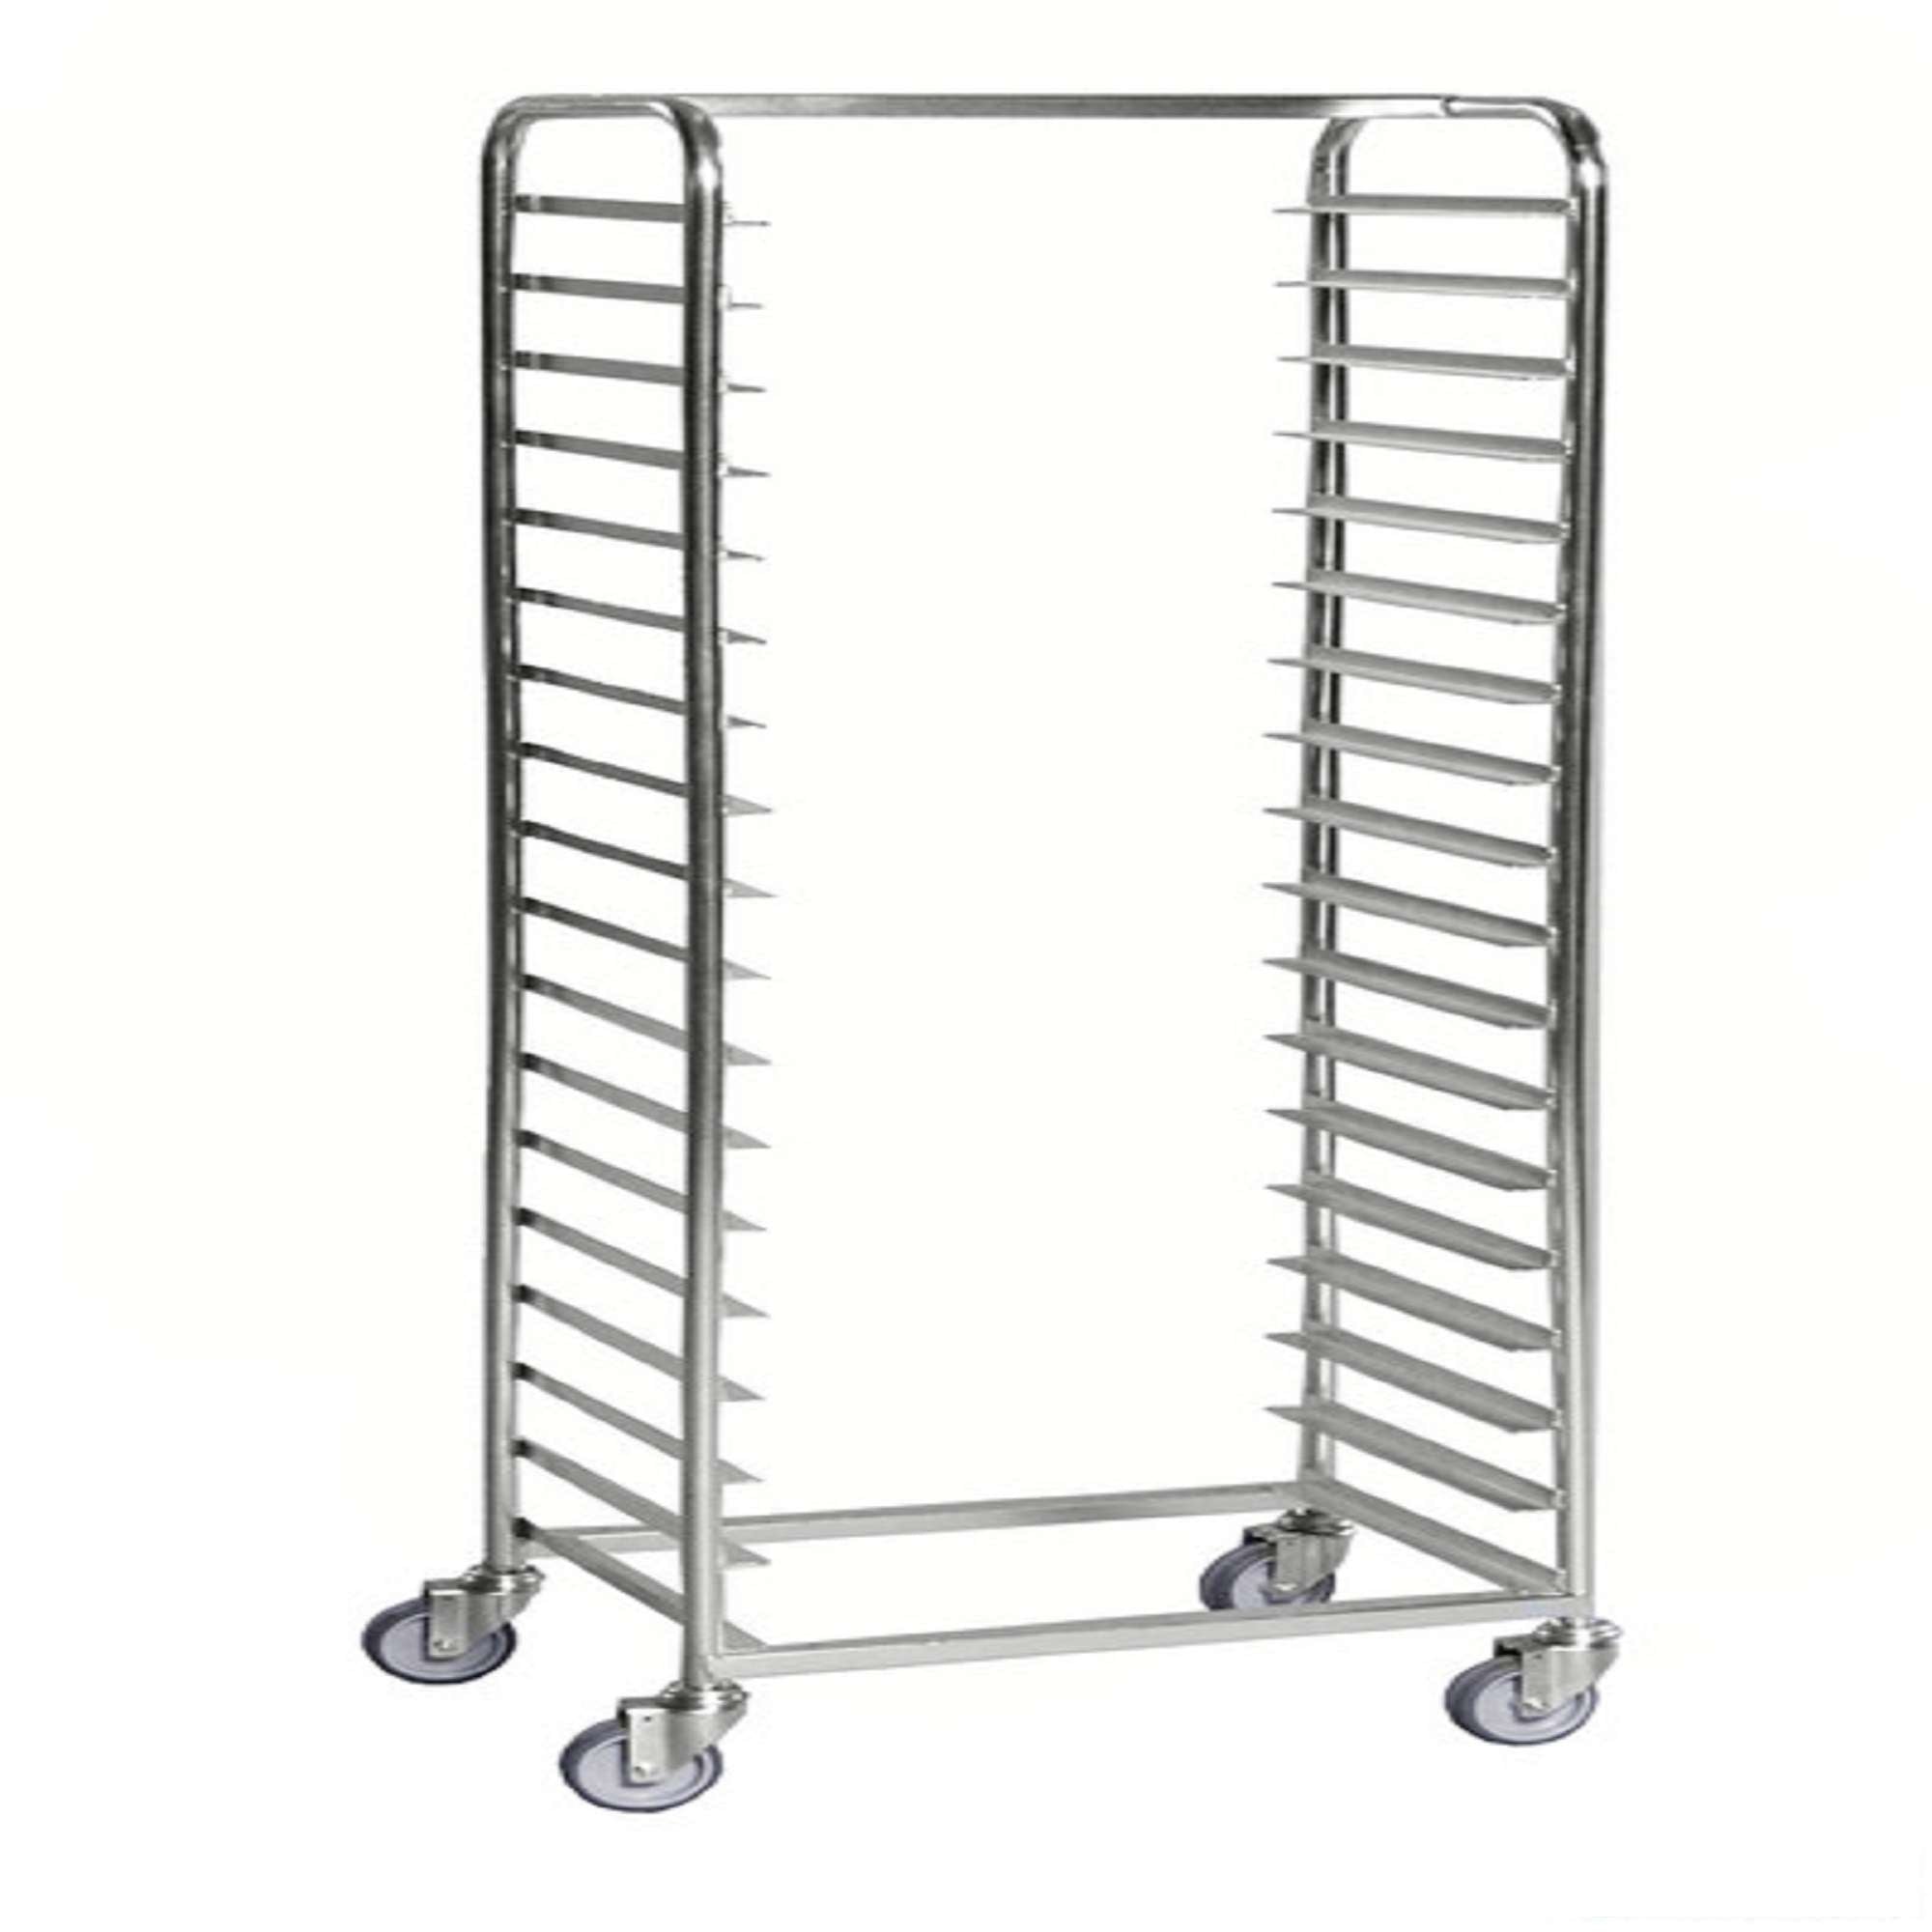 600 x 440 x 1880 Tray trolley for 36 trays or plates with measurements 540x440mm